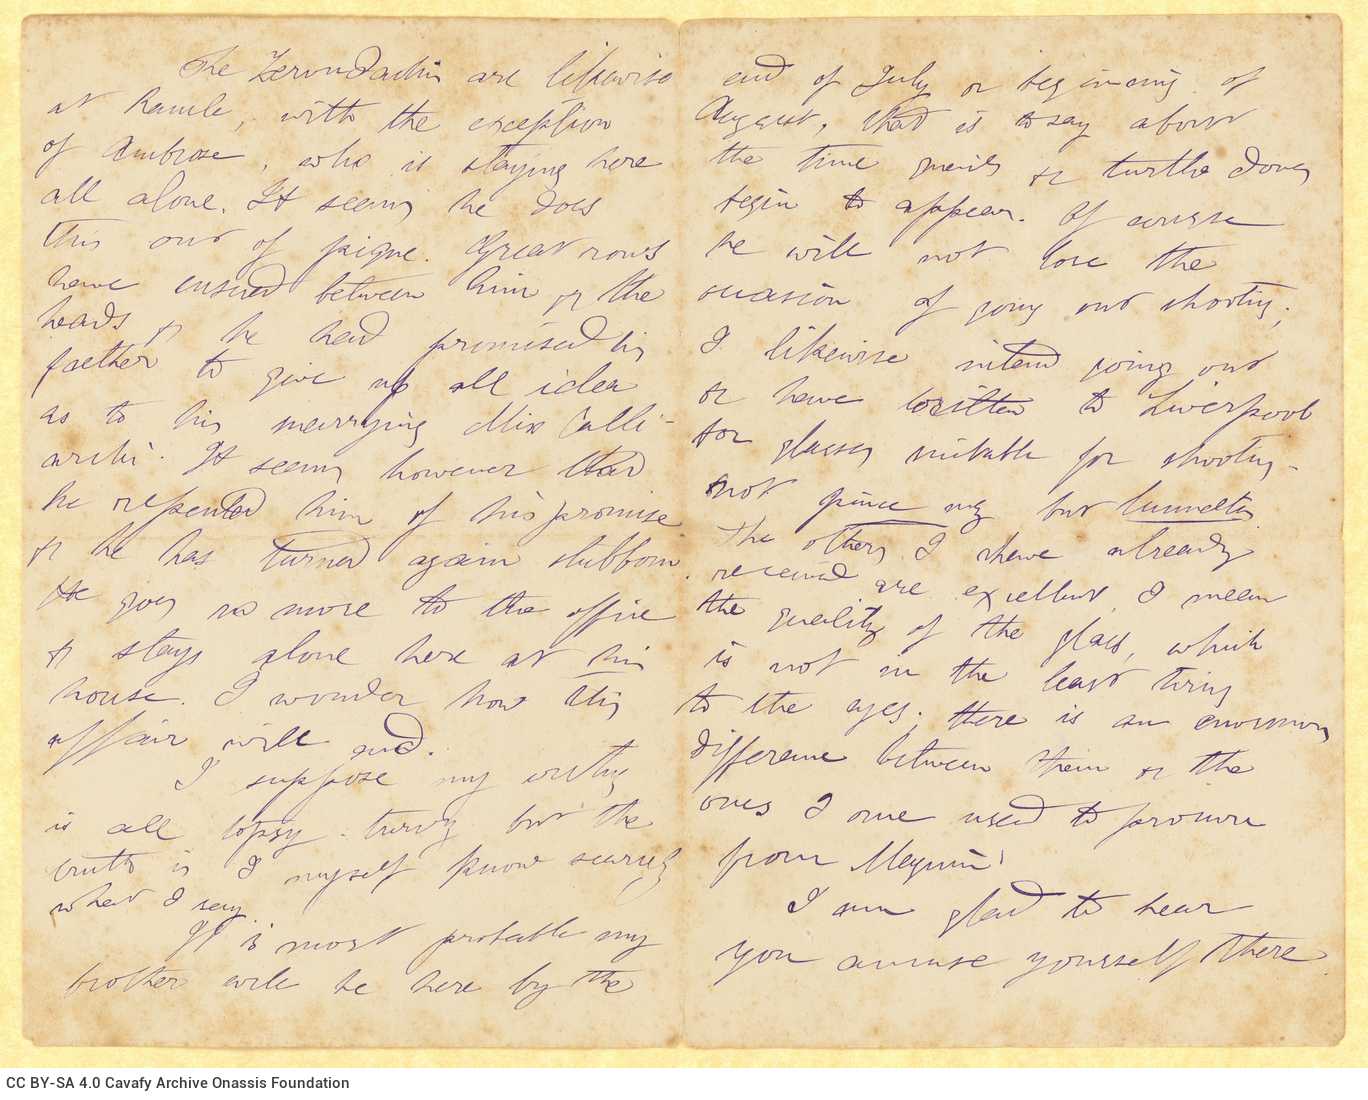 Handwritten letter by Mike Ralli to Cavafy in a bifolio, with notes on all sides. Extensive commentary on people and events r